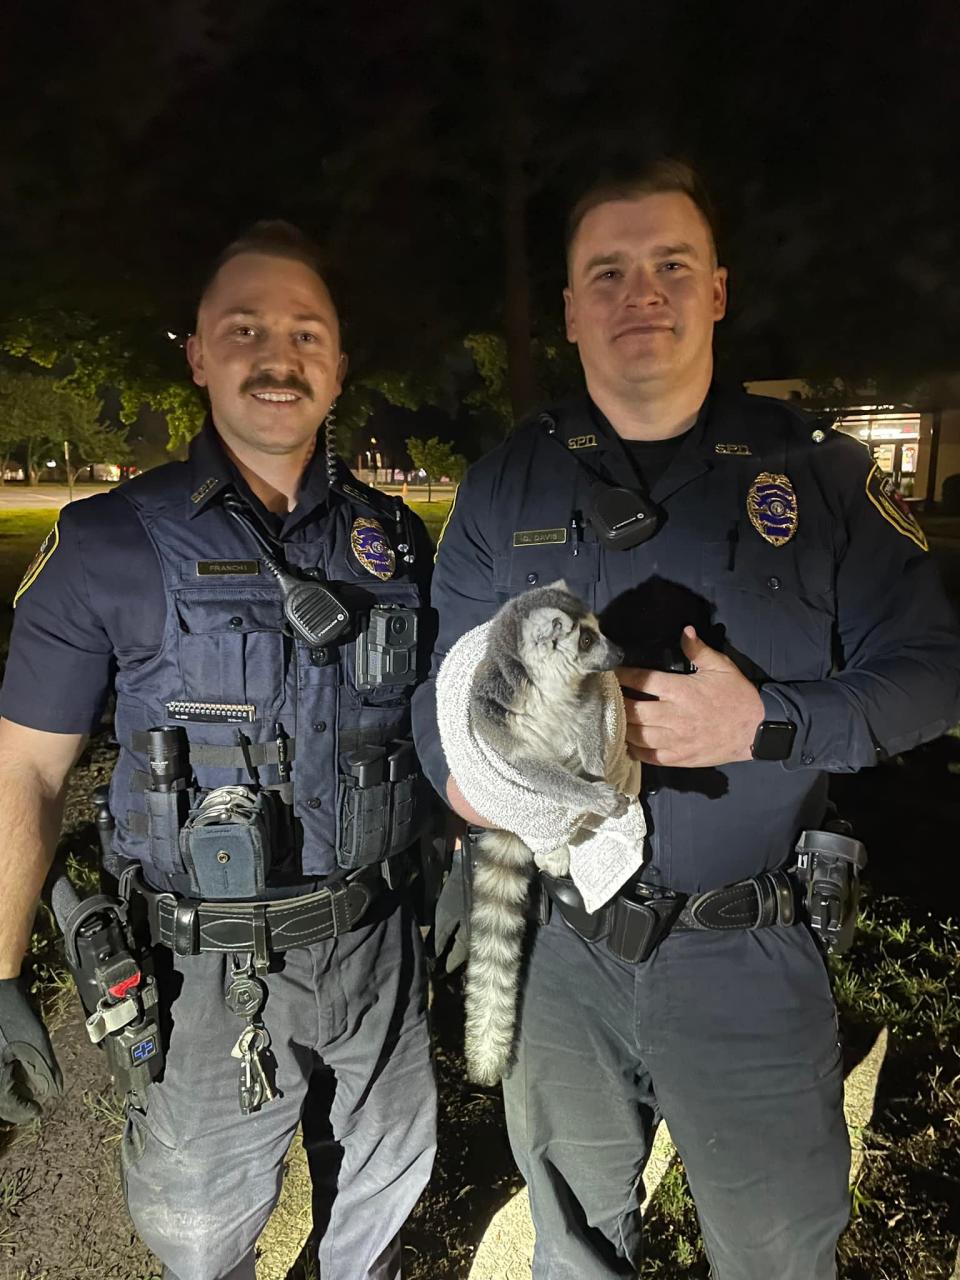 Officer Franchi and Davis from the Springfield Police Department hold a ring-tailed lemur after capturing it on Kimbrough and Woodland. The animal was being kept as a pet which is not allowed within city limits.